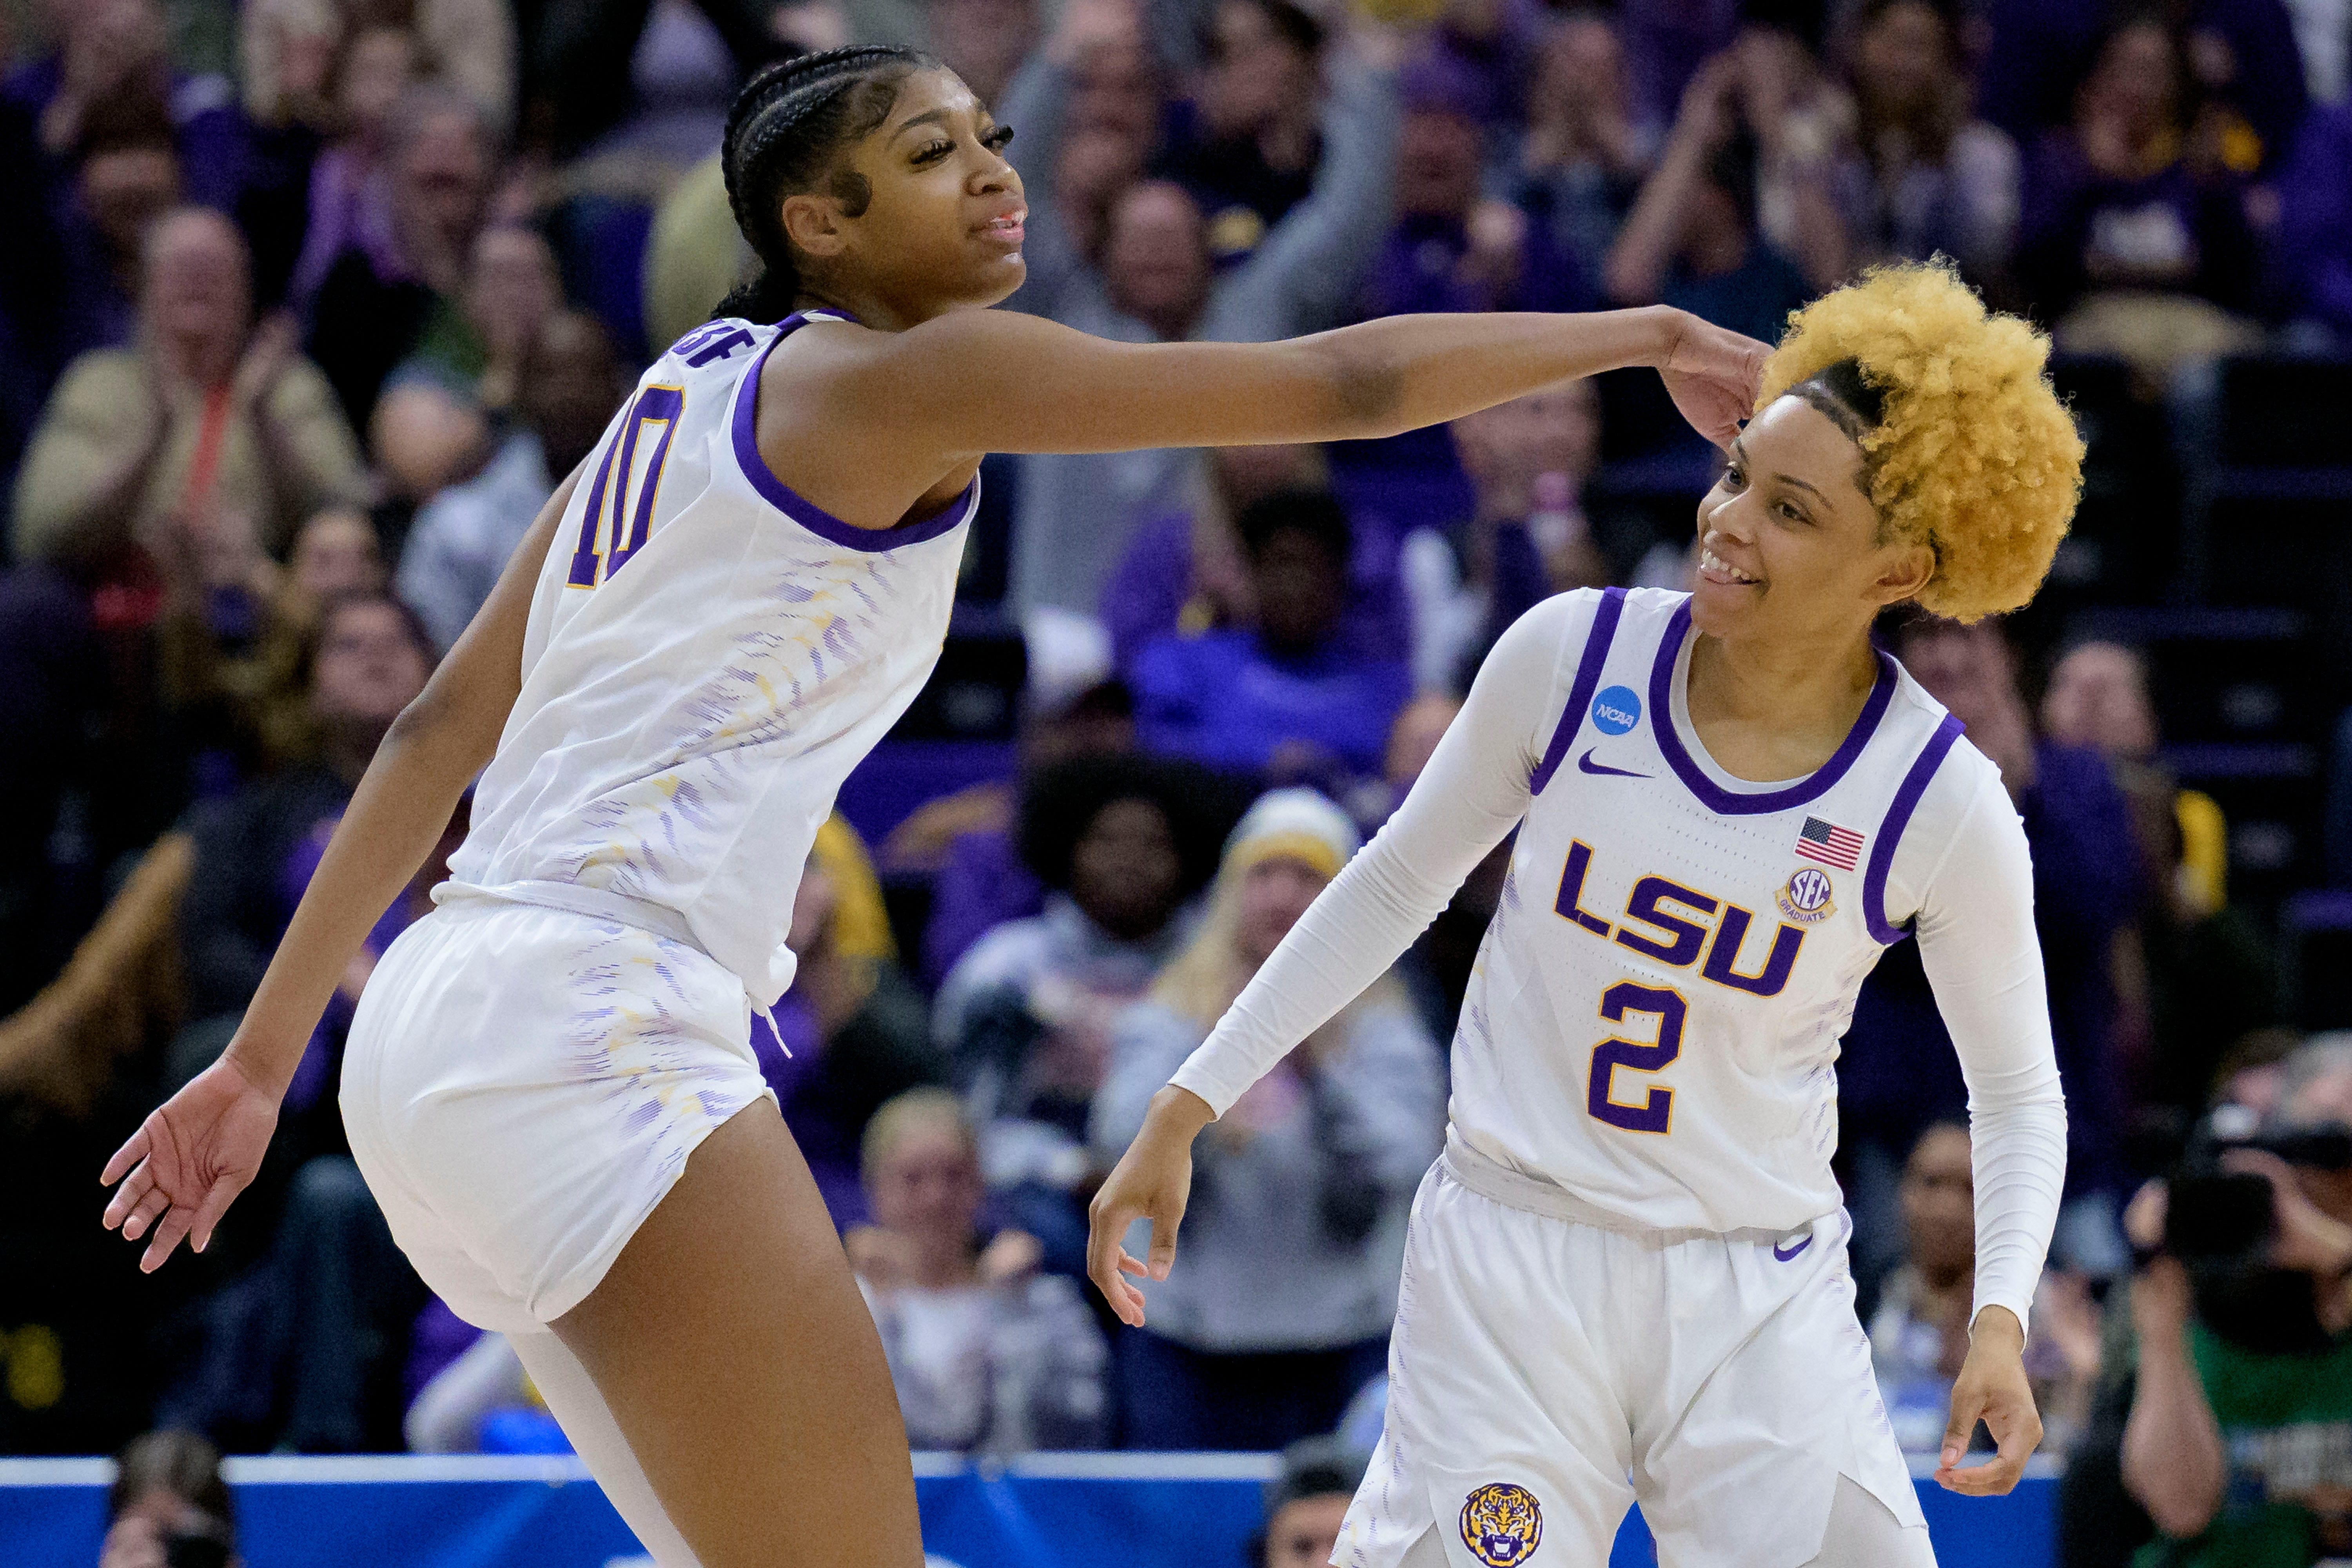 LSU forward Angel Reese (10) celebrates the 3-point basket of guard Jasmine Carson (2) during the first half of the team's second-round college basketball game against Michigan in the women's NCAA Tournament in Baton Rouge, La., Sunday, March 19, 2023. (AP Photo/Matthew Hinton)